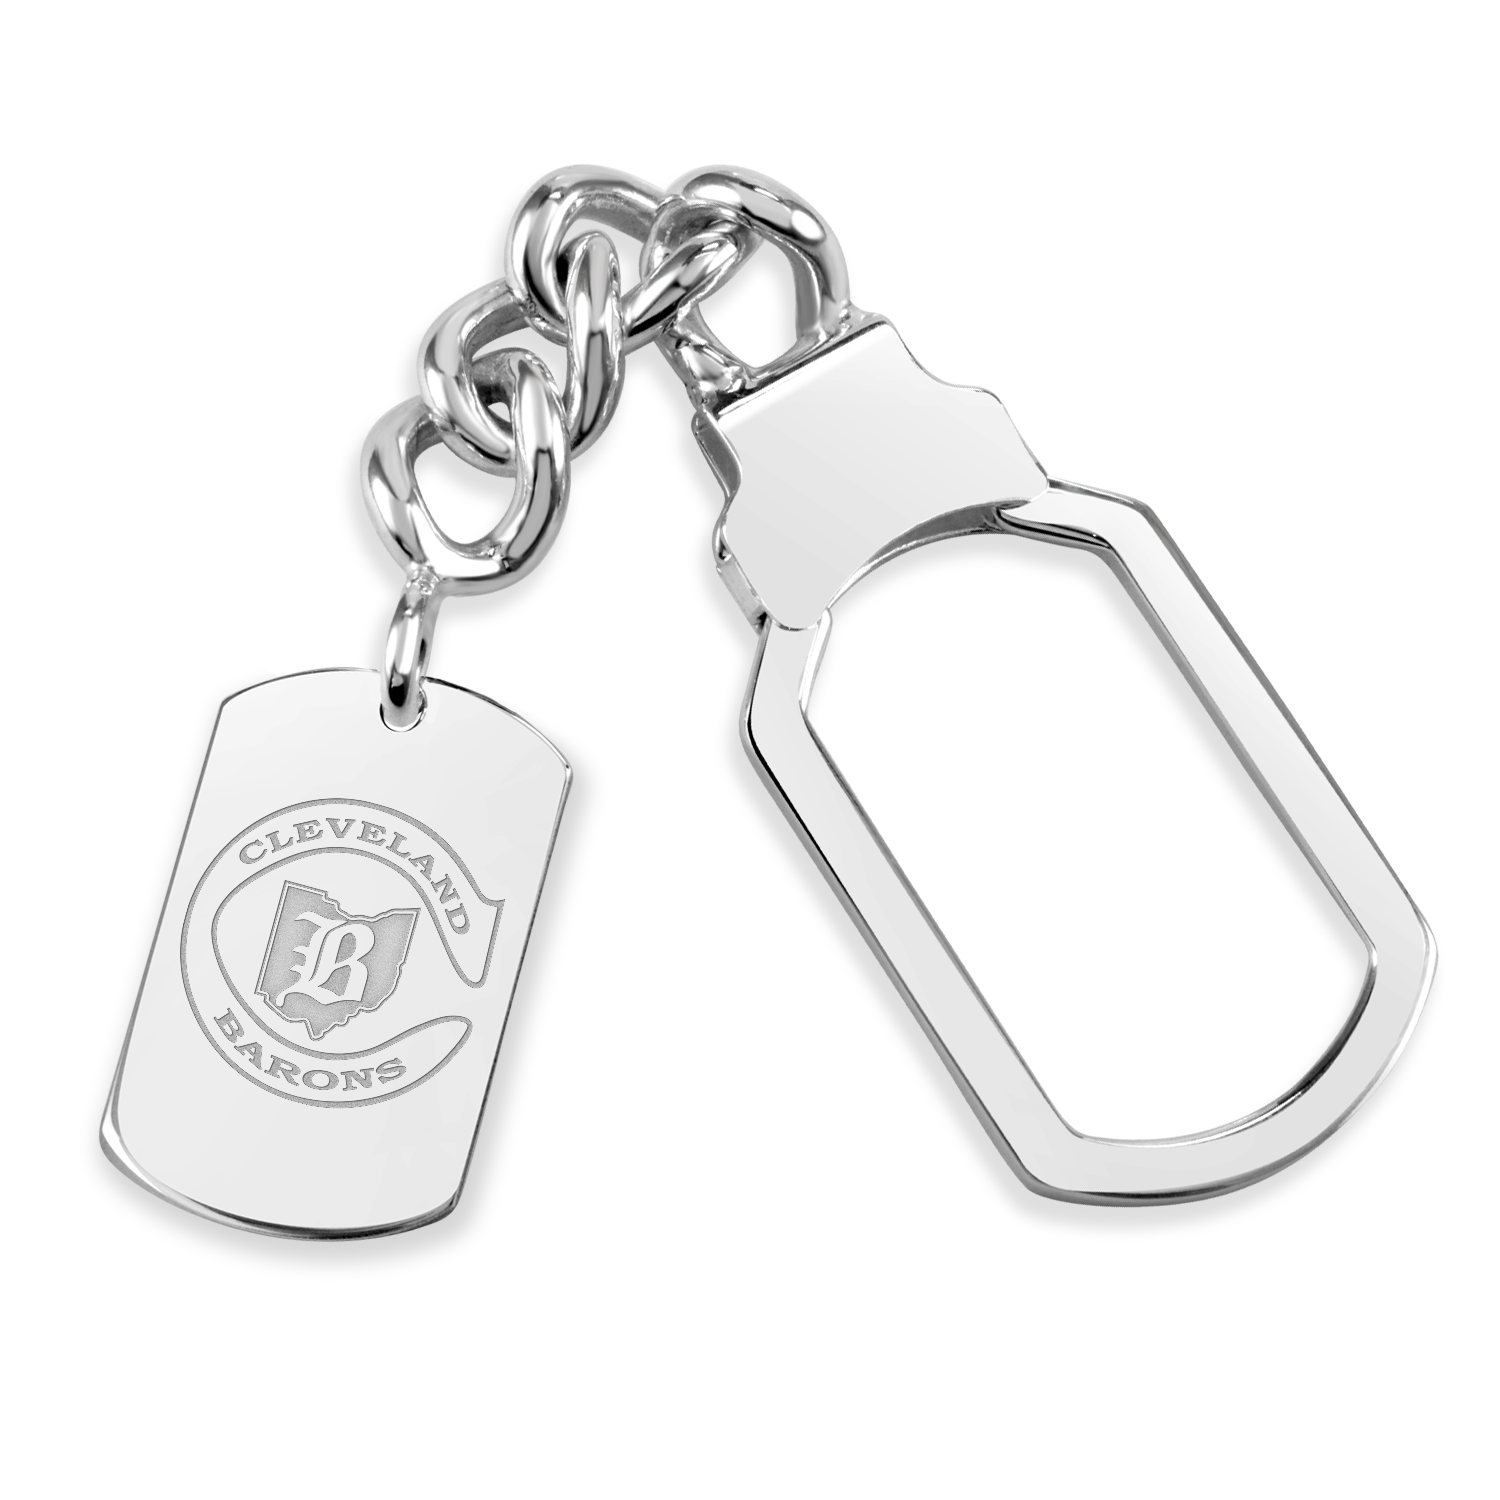 Cleveland Barons Tension Lock Key Chain Tag